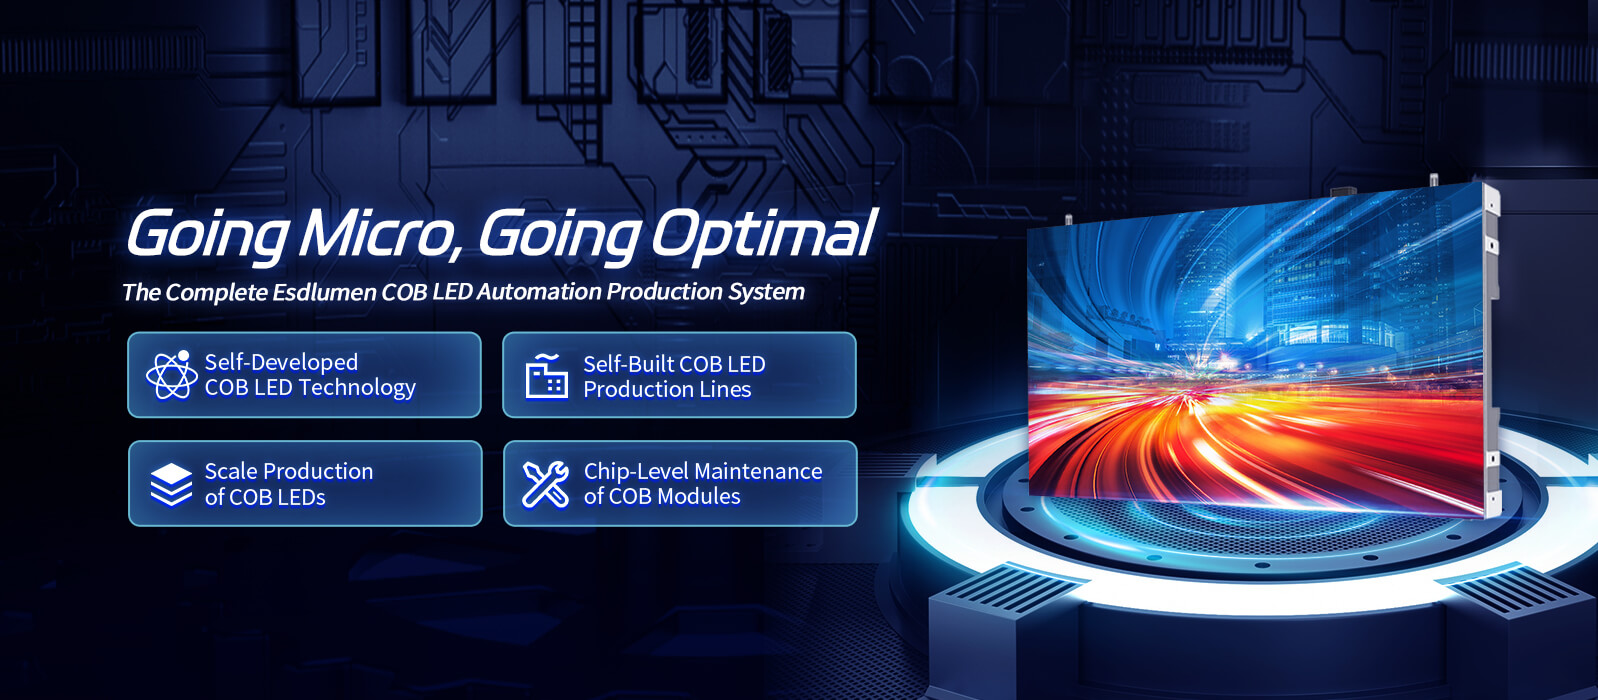 The Complete Esdlumen COB LED Automation Production System